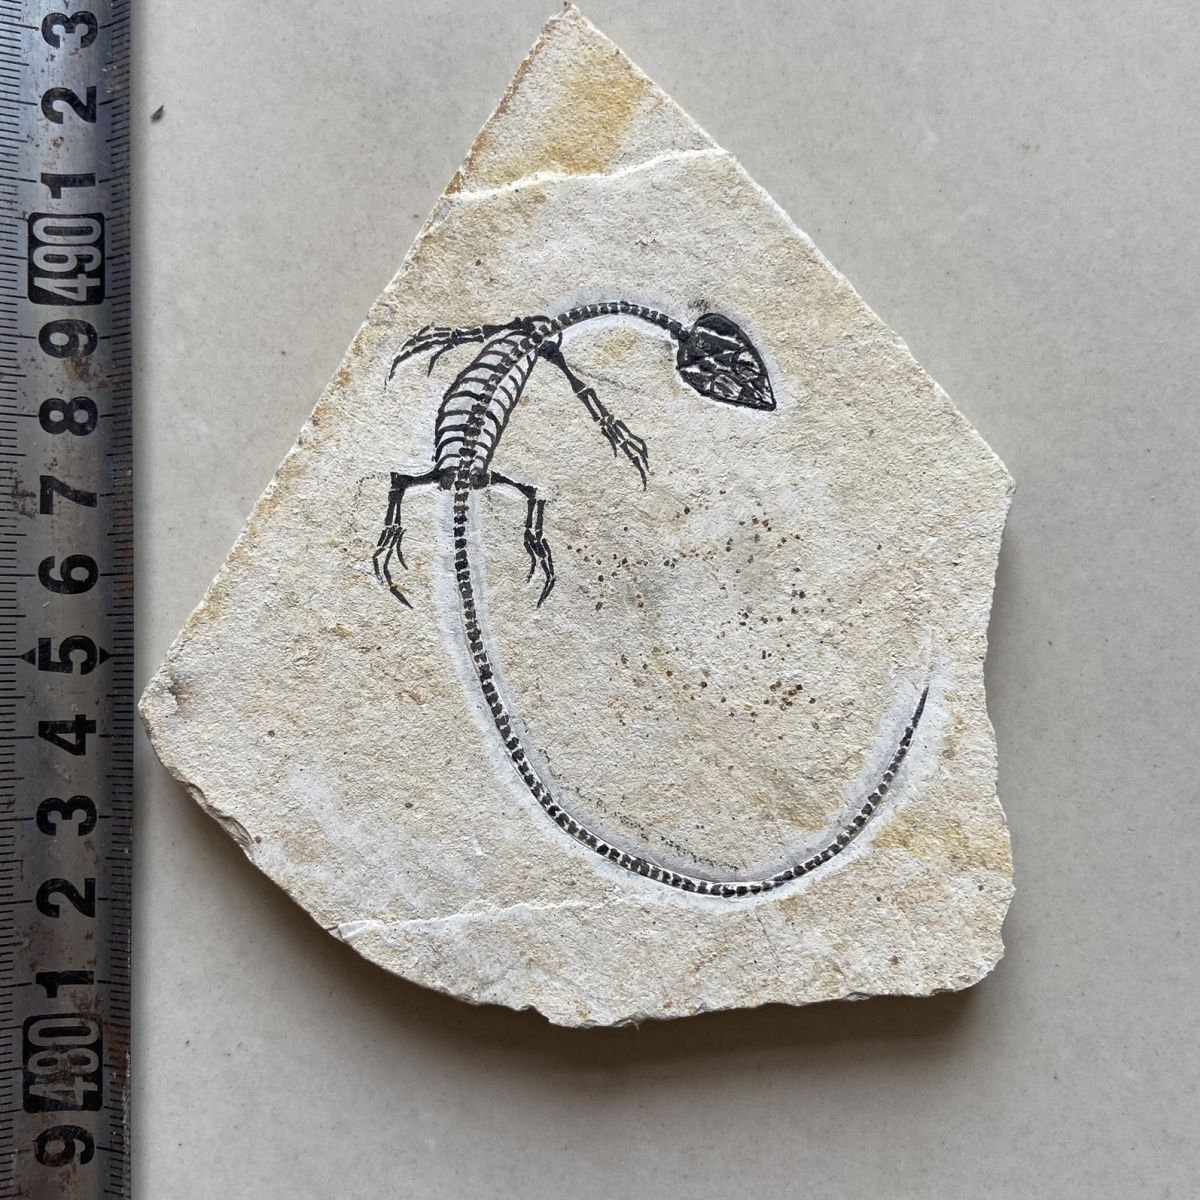 Unique and authentic collection of aquatic lizard fossils